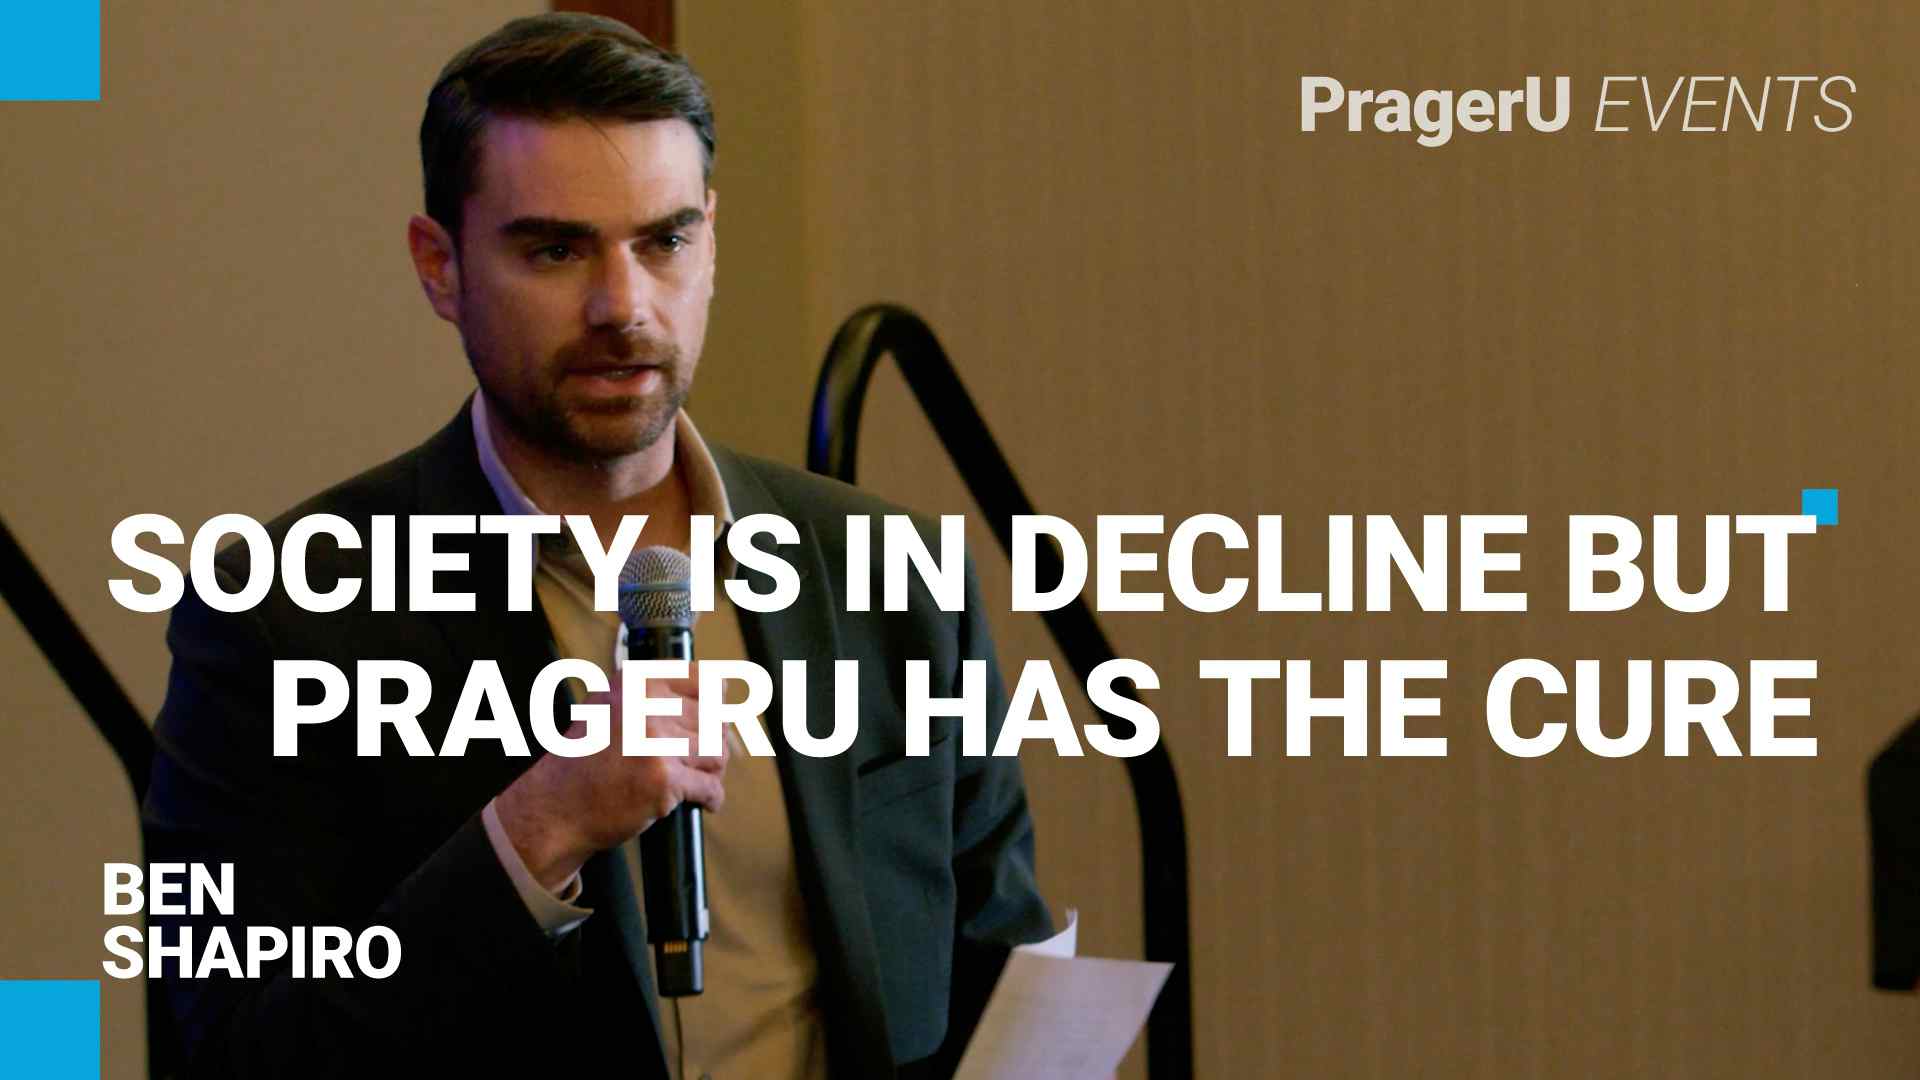 Society Is in Decline but PragerU Has the Cure